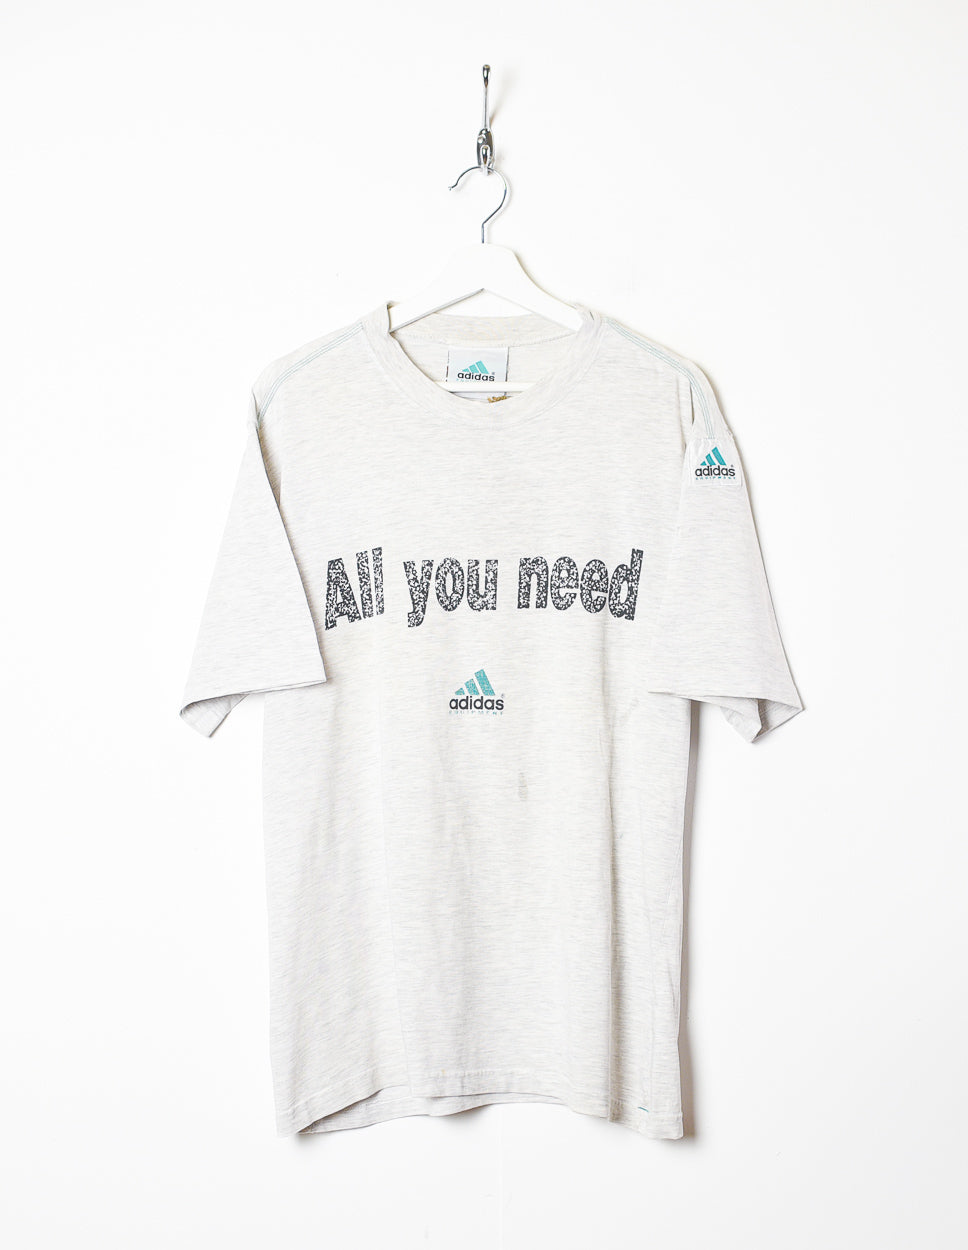 Stone Adidas Equipment All You Need T-Shirt - Large